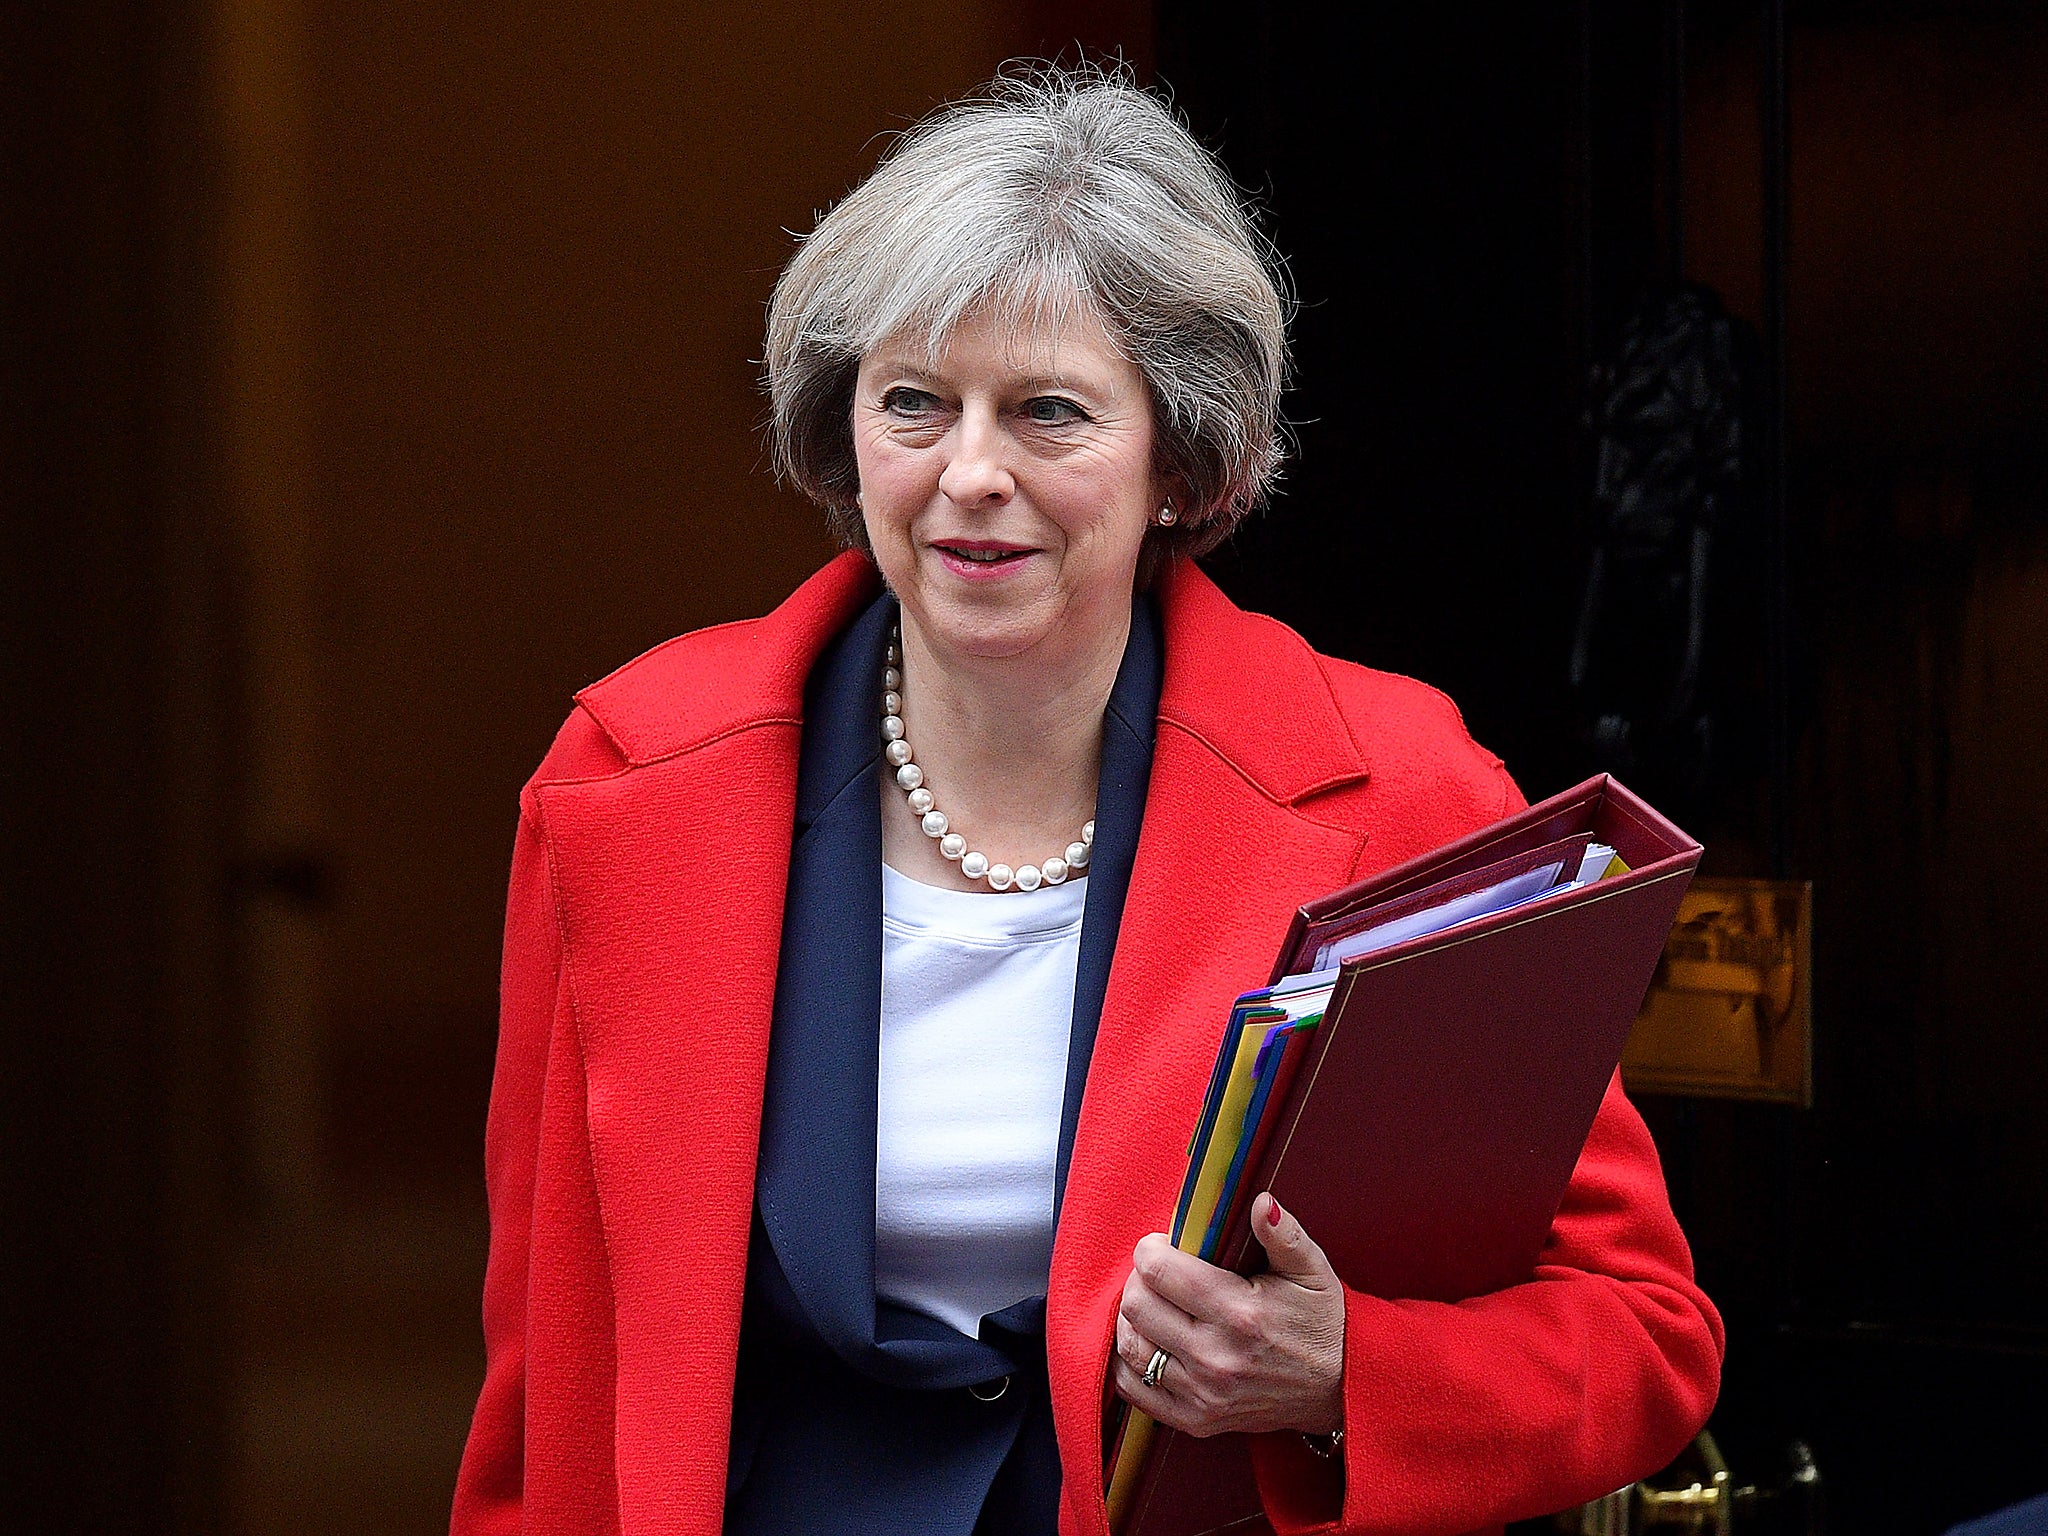 Theresa May’s controversial Snooper’s Charter passed into law earlier this month